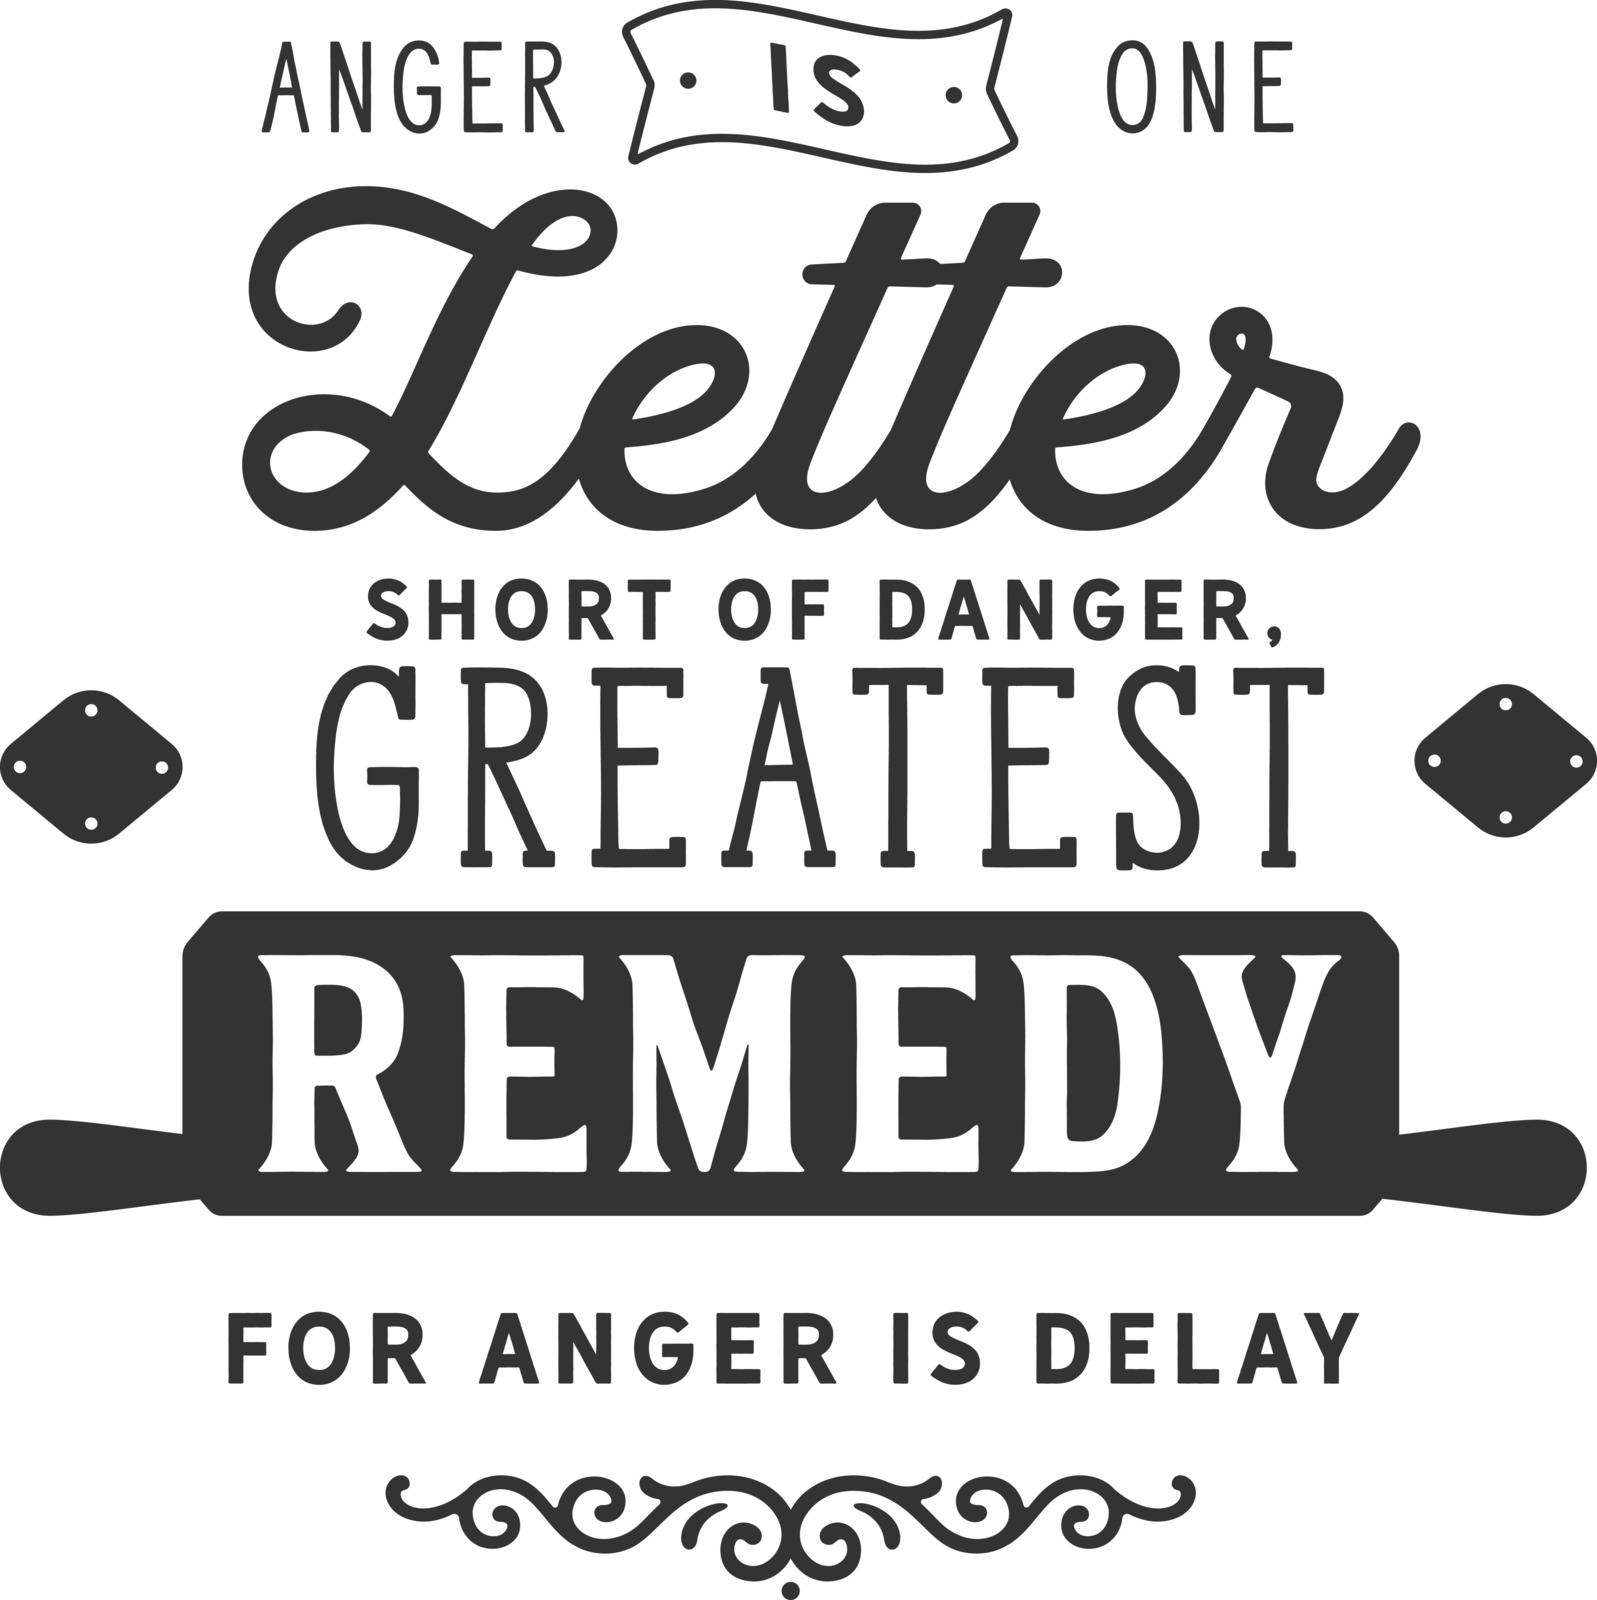 Anger is one letter short of danger, Greatest remedy for anger is delay